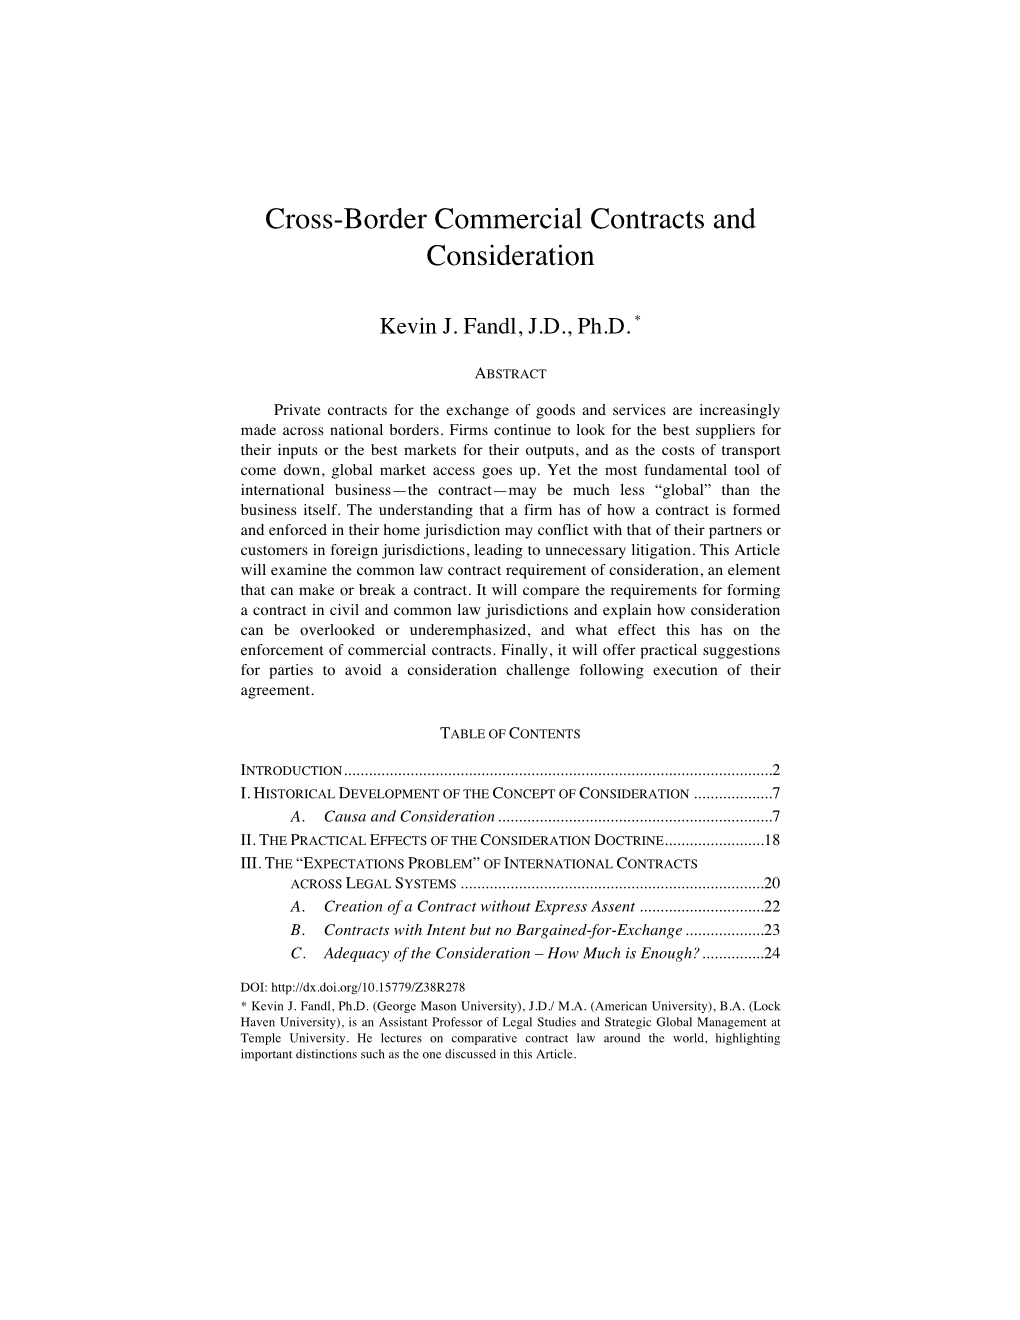 Cross-Border Commercial Contracts and Consideration